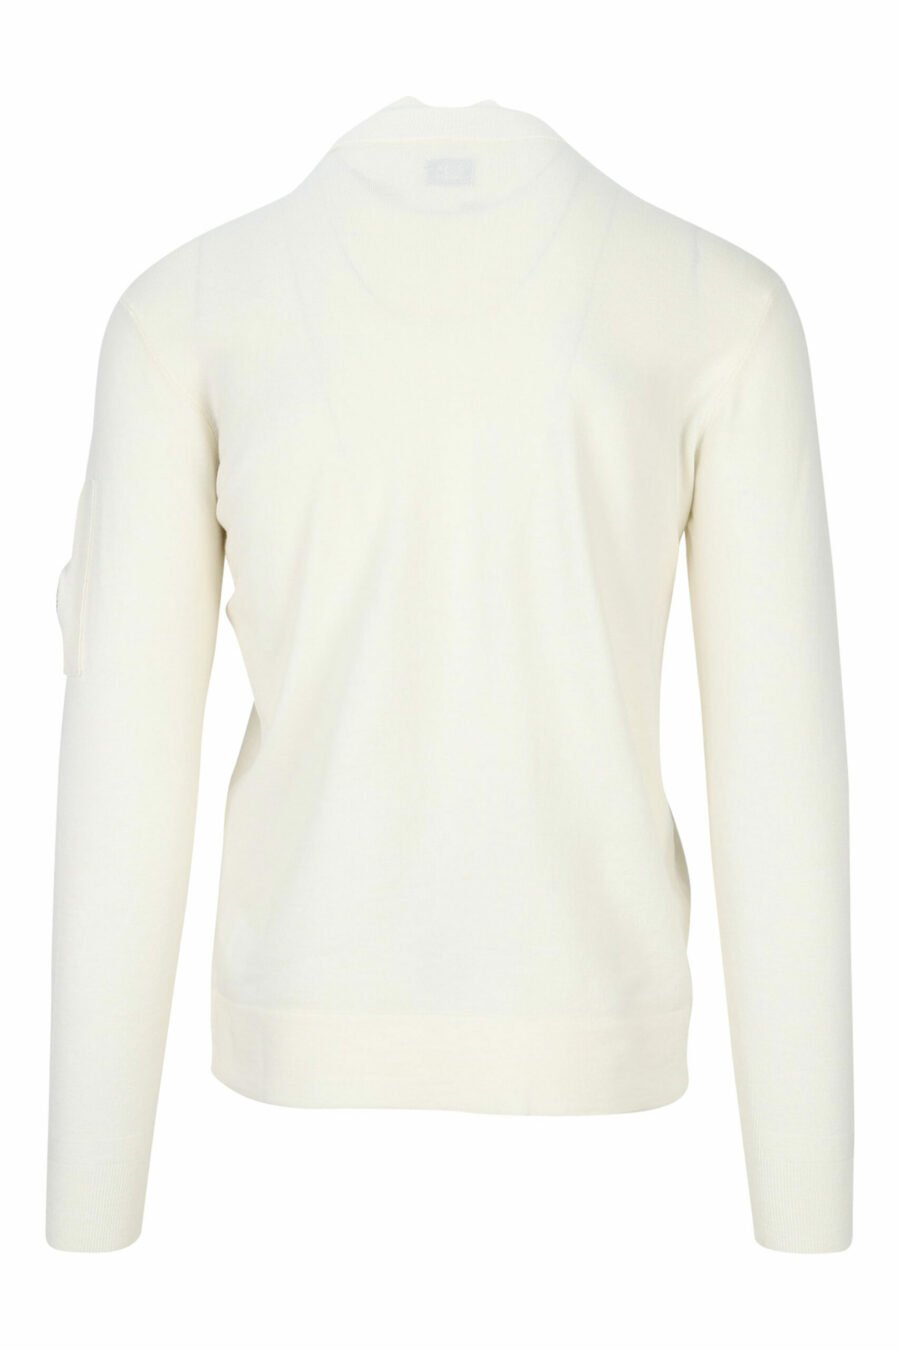 White turtleneck jumper with zip and side lens logo - 7620943601213 2 scaled